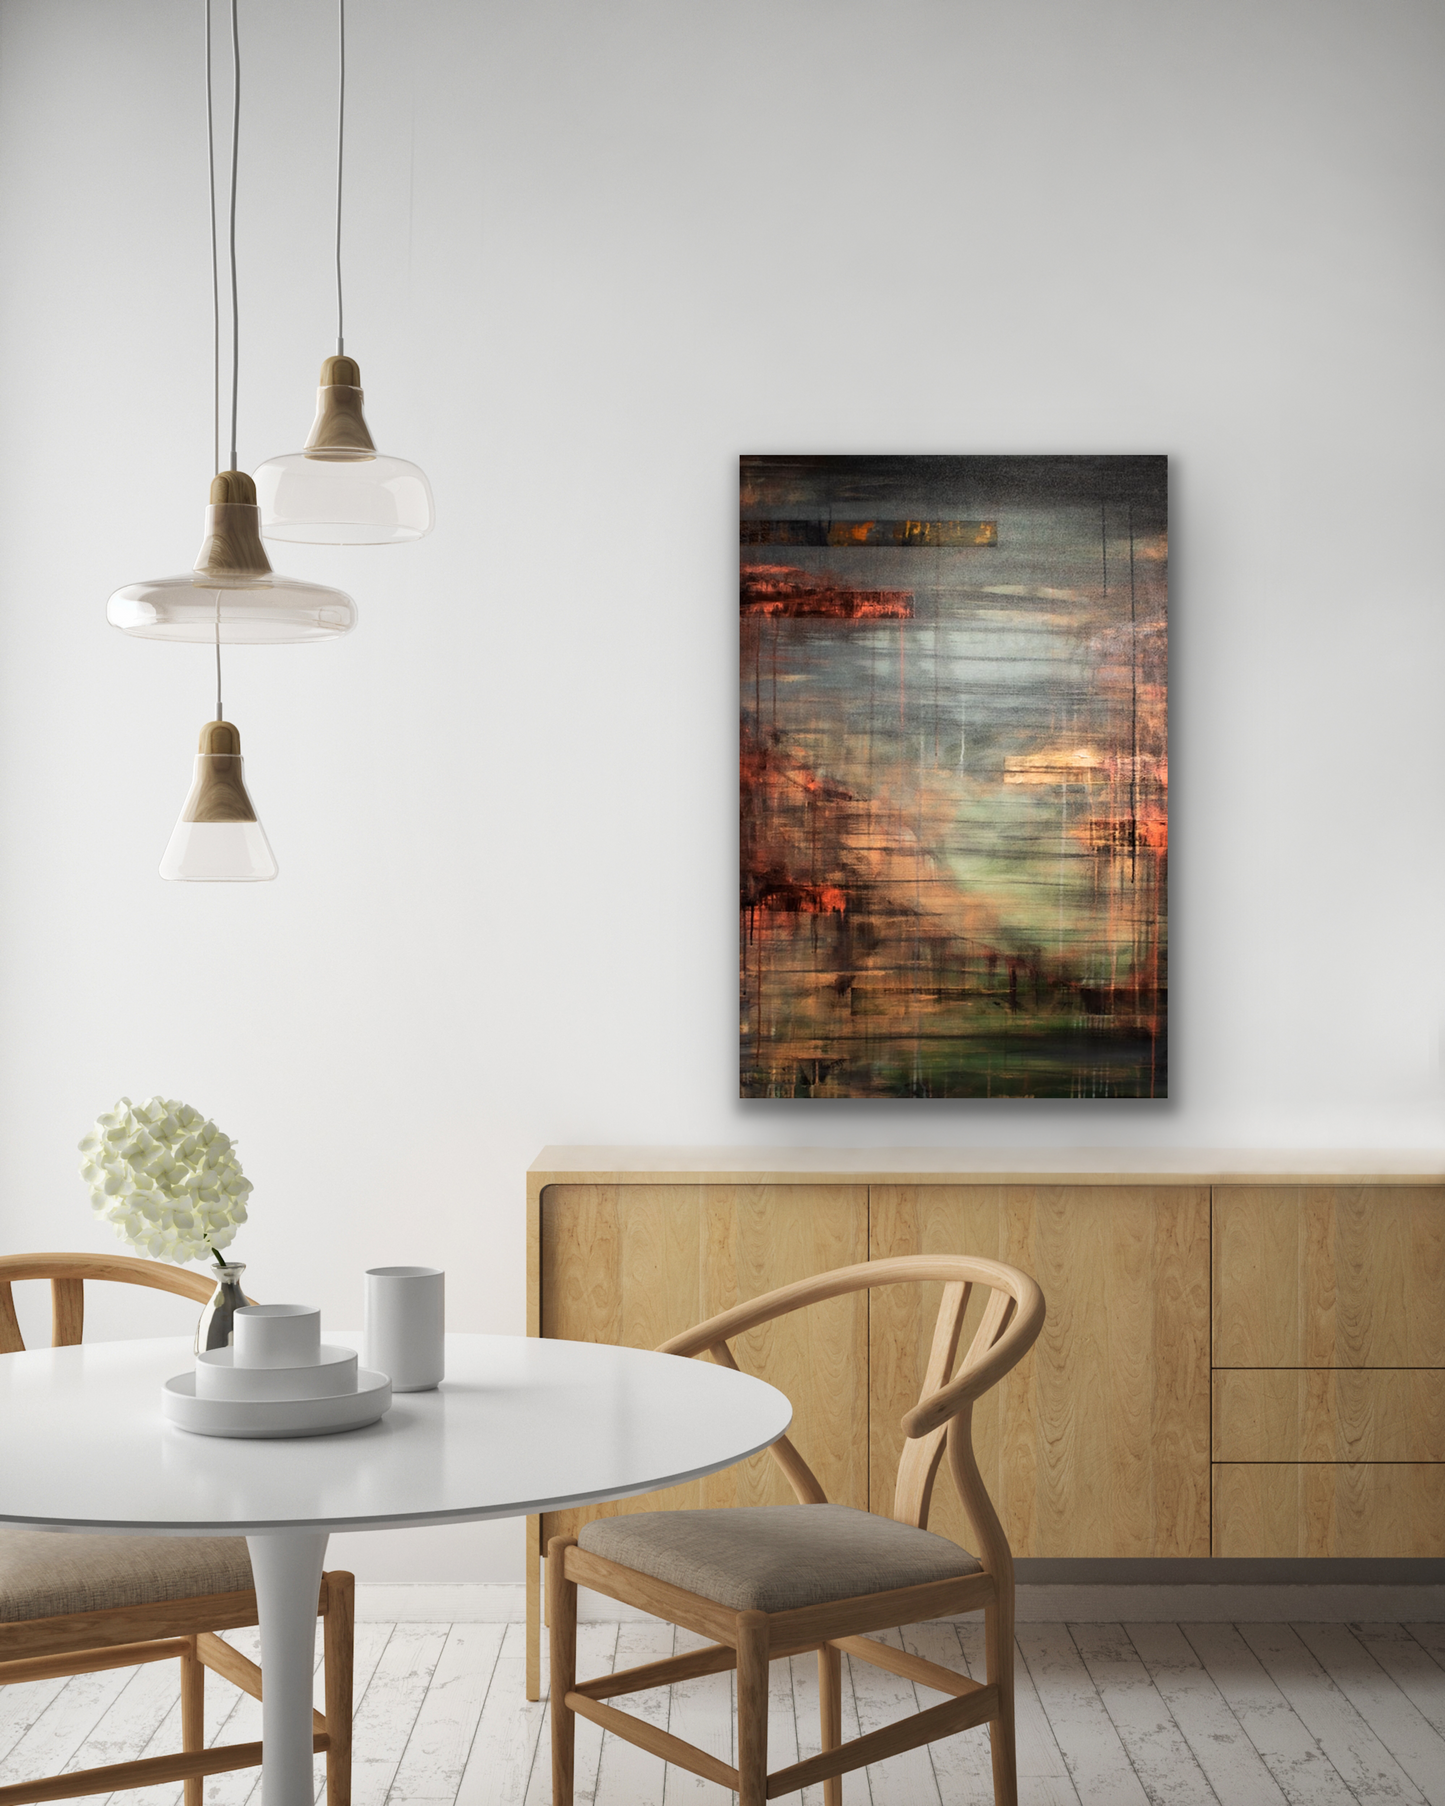 This abstract work of art has a diverse colour palette including orange, green, yellow and brown.  The canvas print comes in three sizes to fit your wall perfectly.